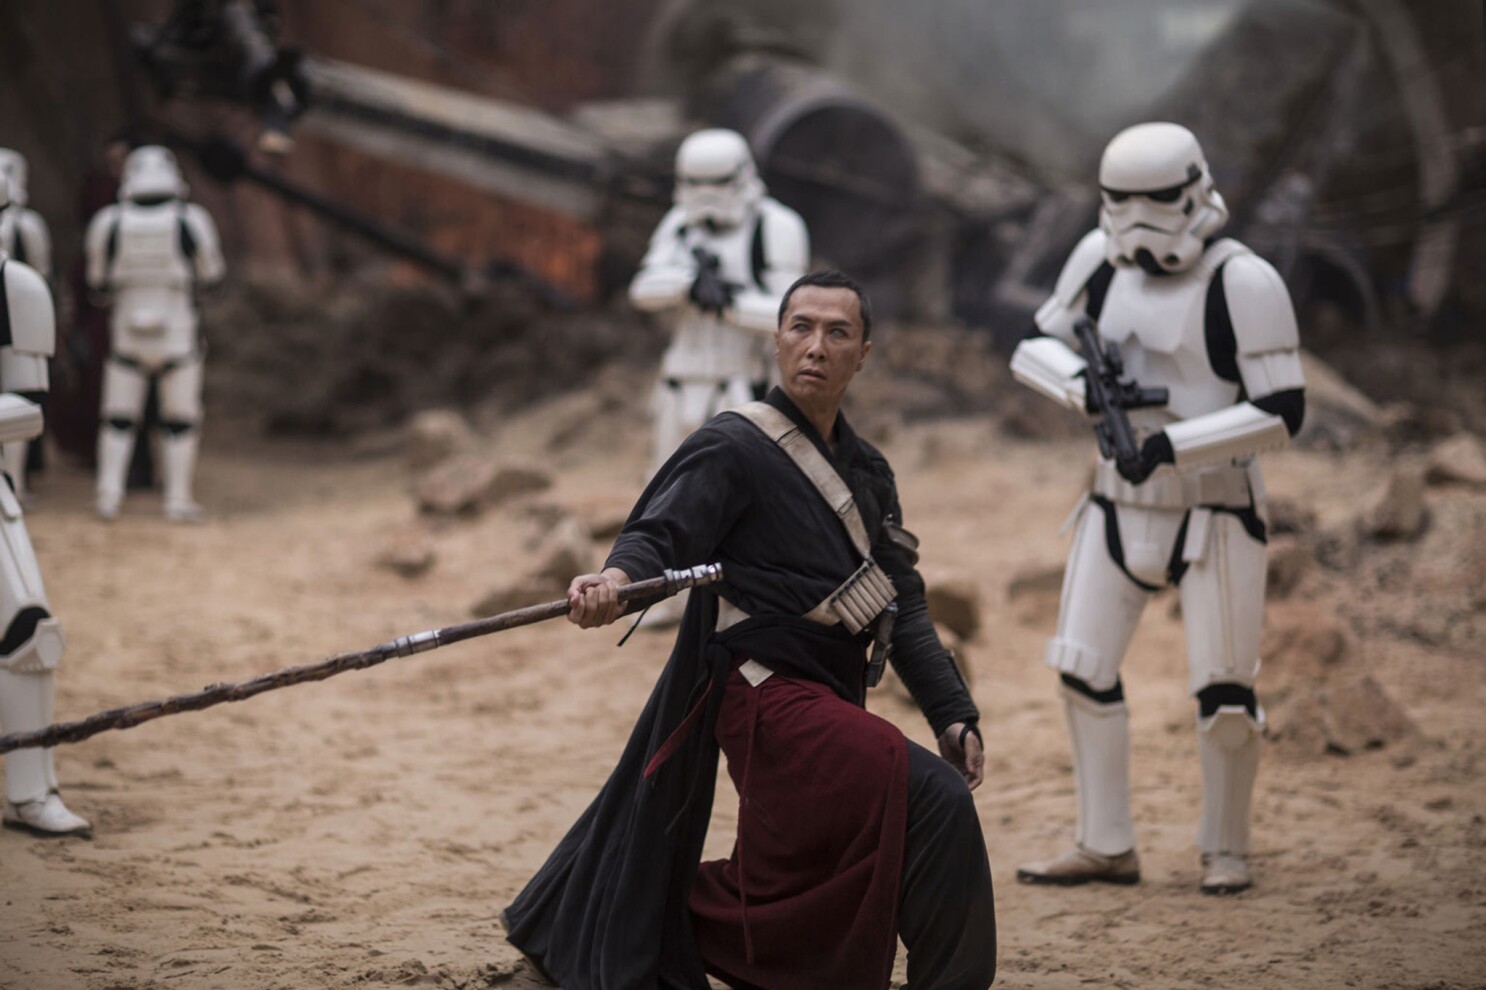 One of the best characters in Rogue of One is Chirrut